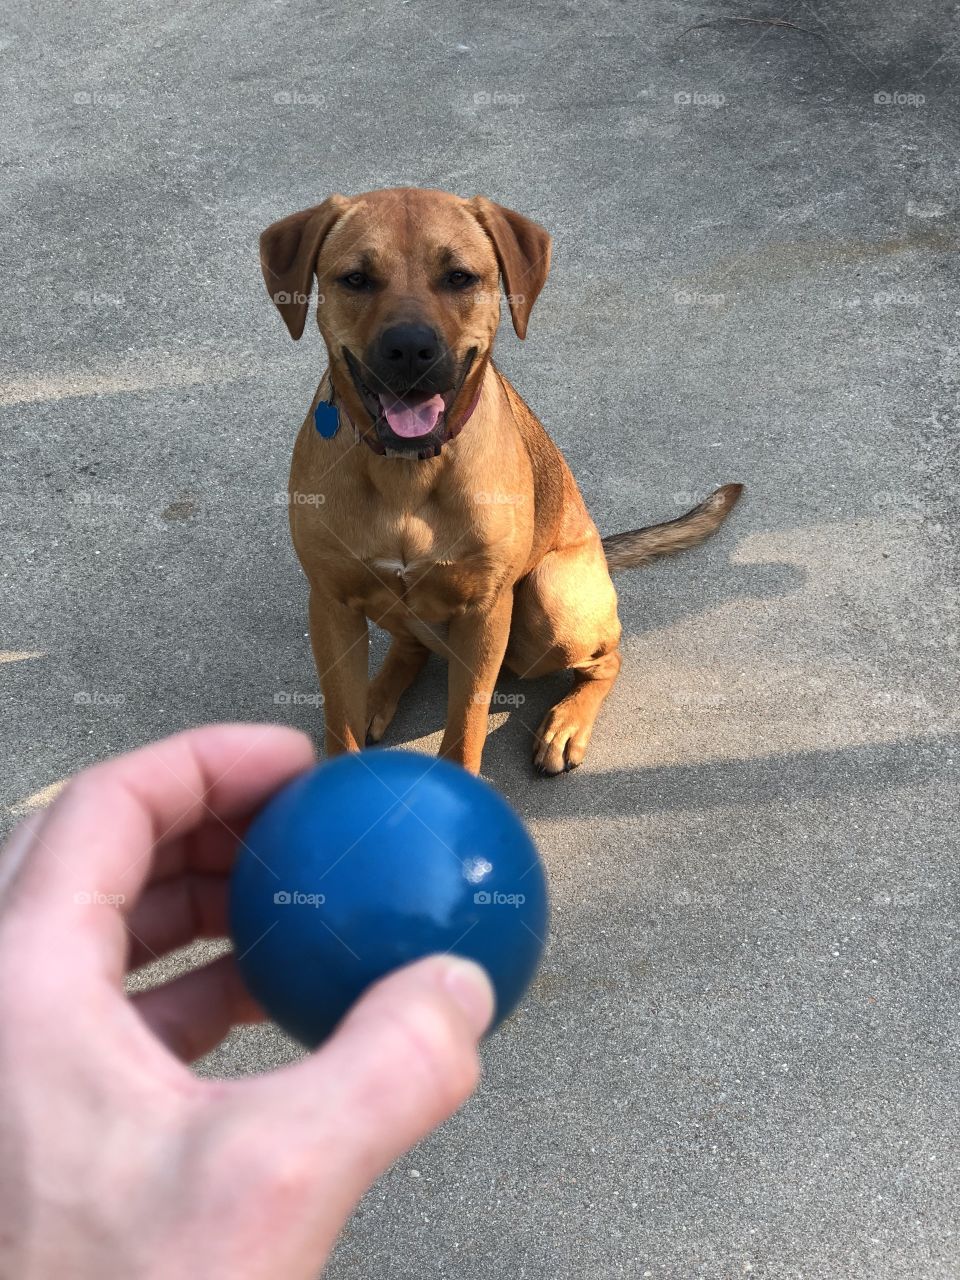 Macie waiting patiently for me to throw the ball 